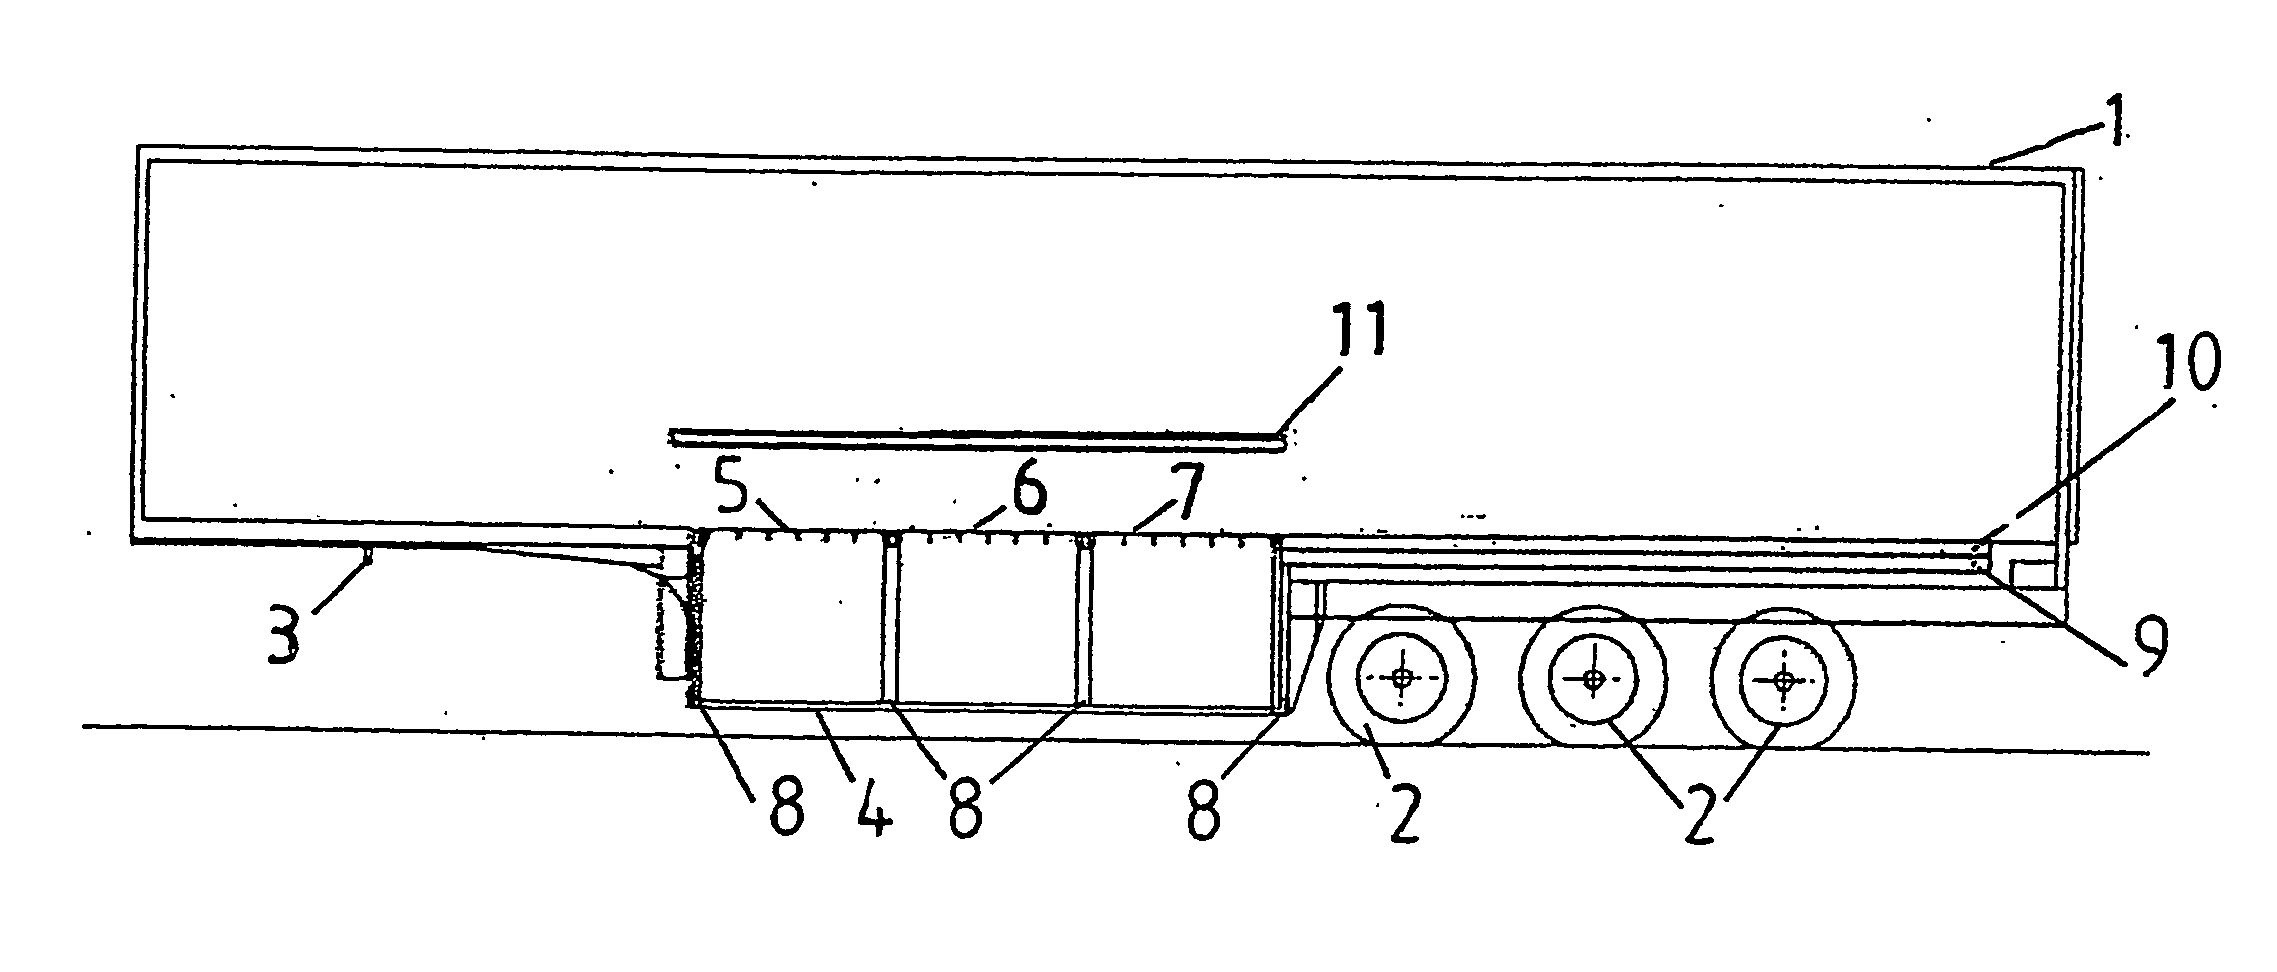 Vehicles and Trailers Incorporating Moveable Load Carrying Platforms